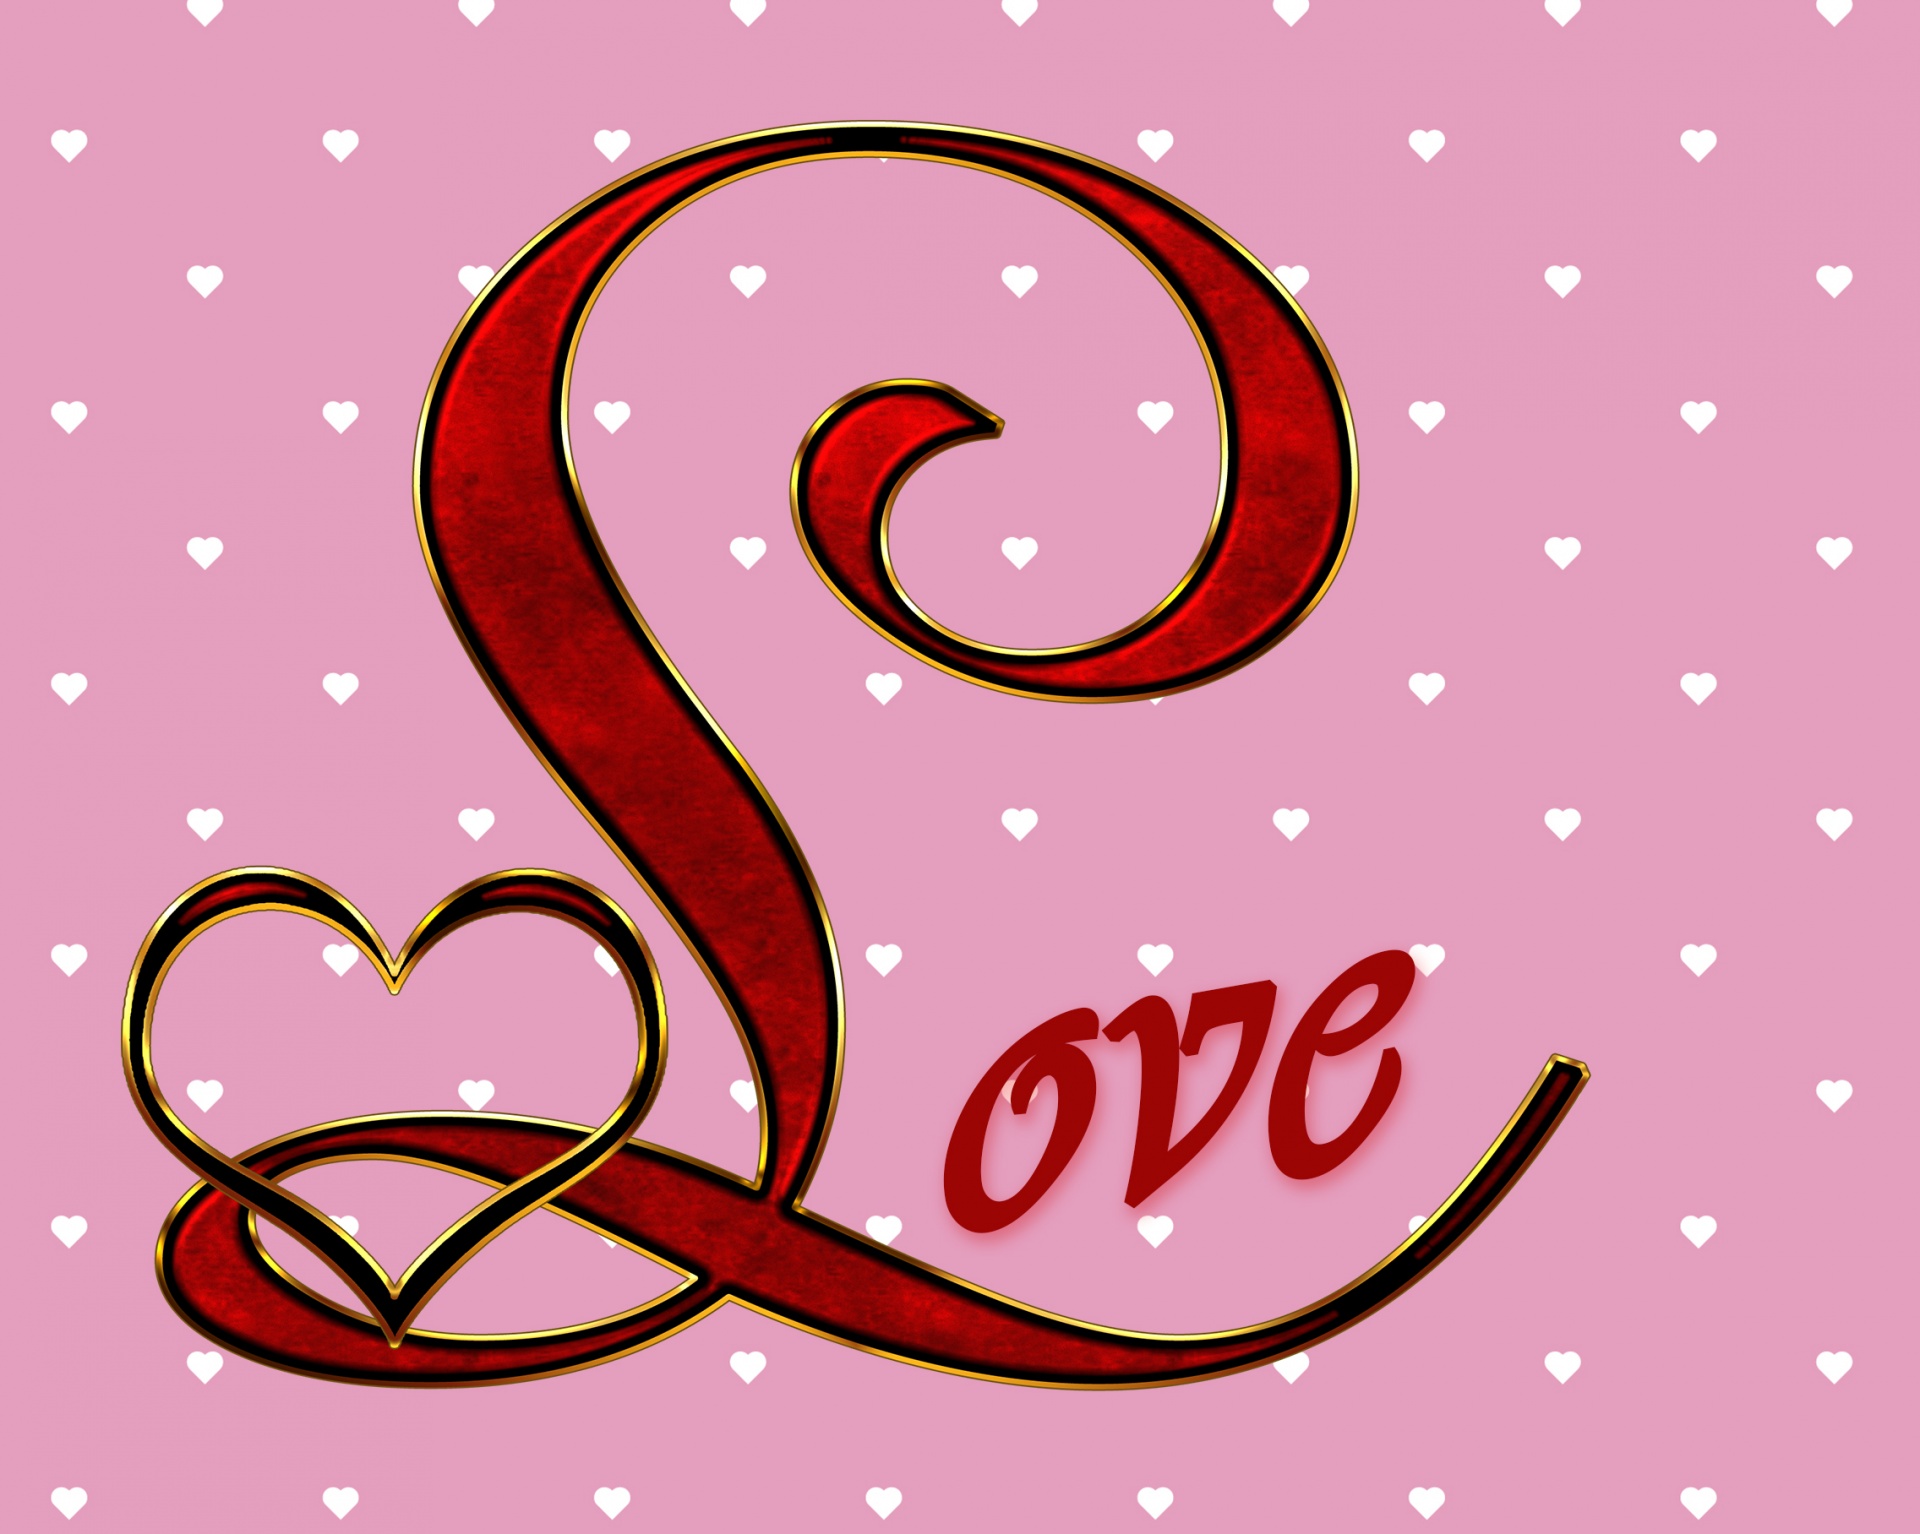 Download free photo of Love,hearts,heart,letter l,initial l - from  